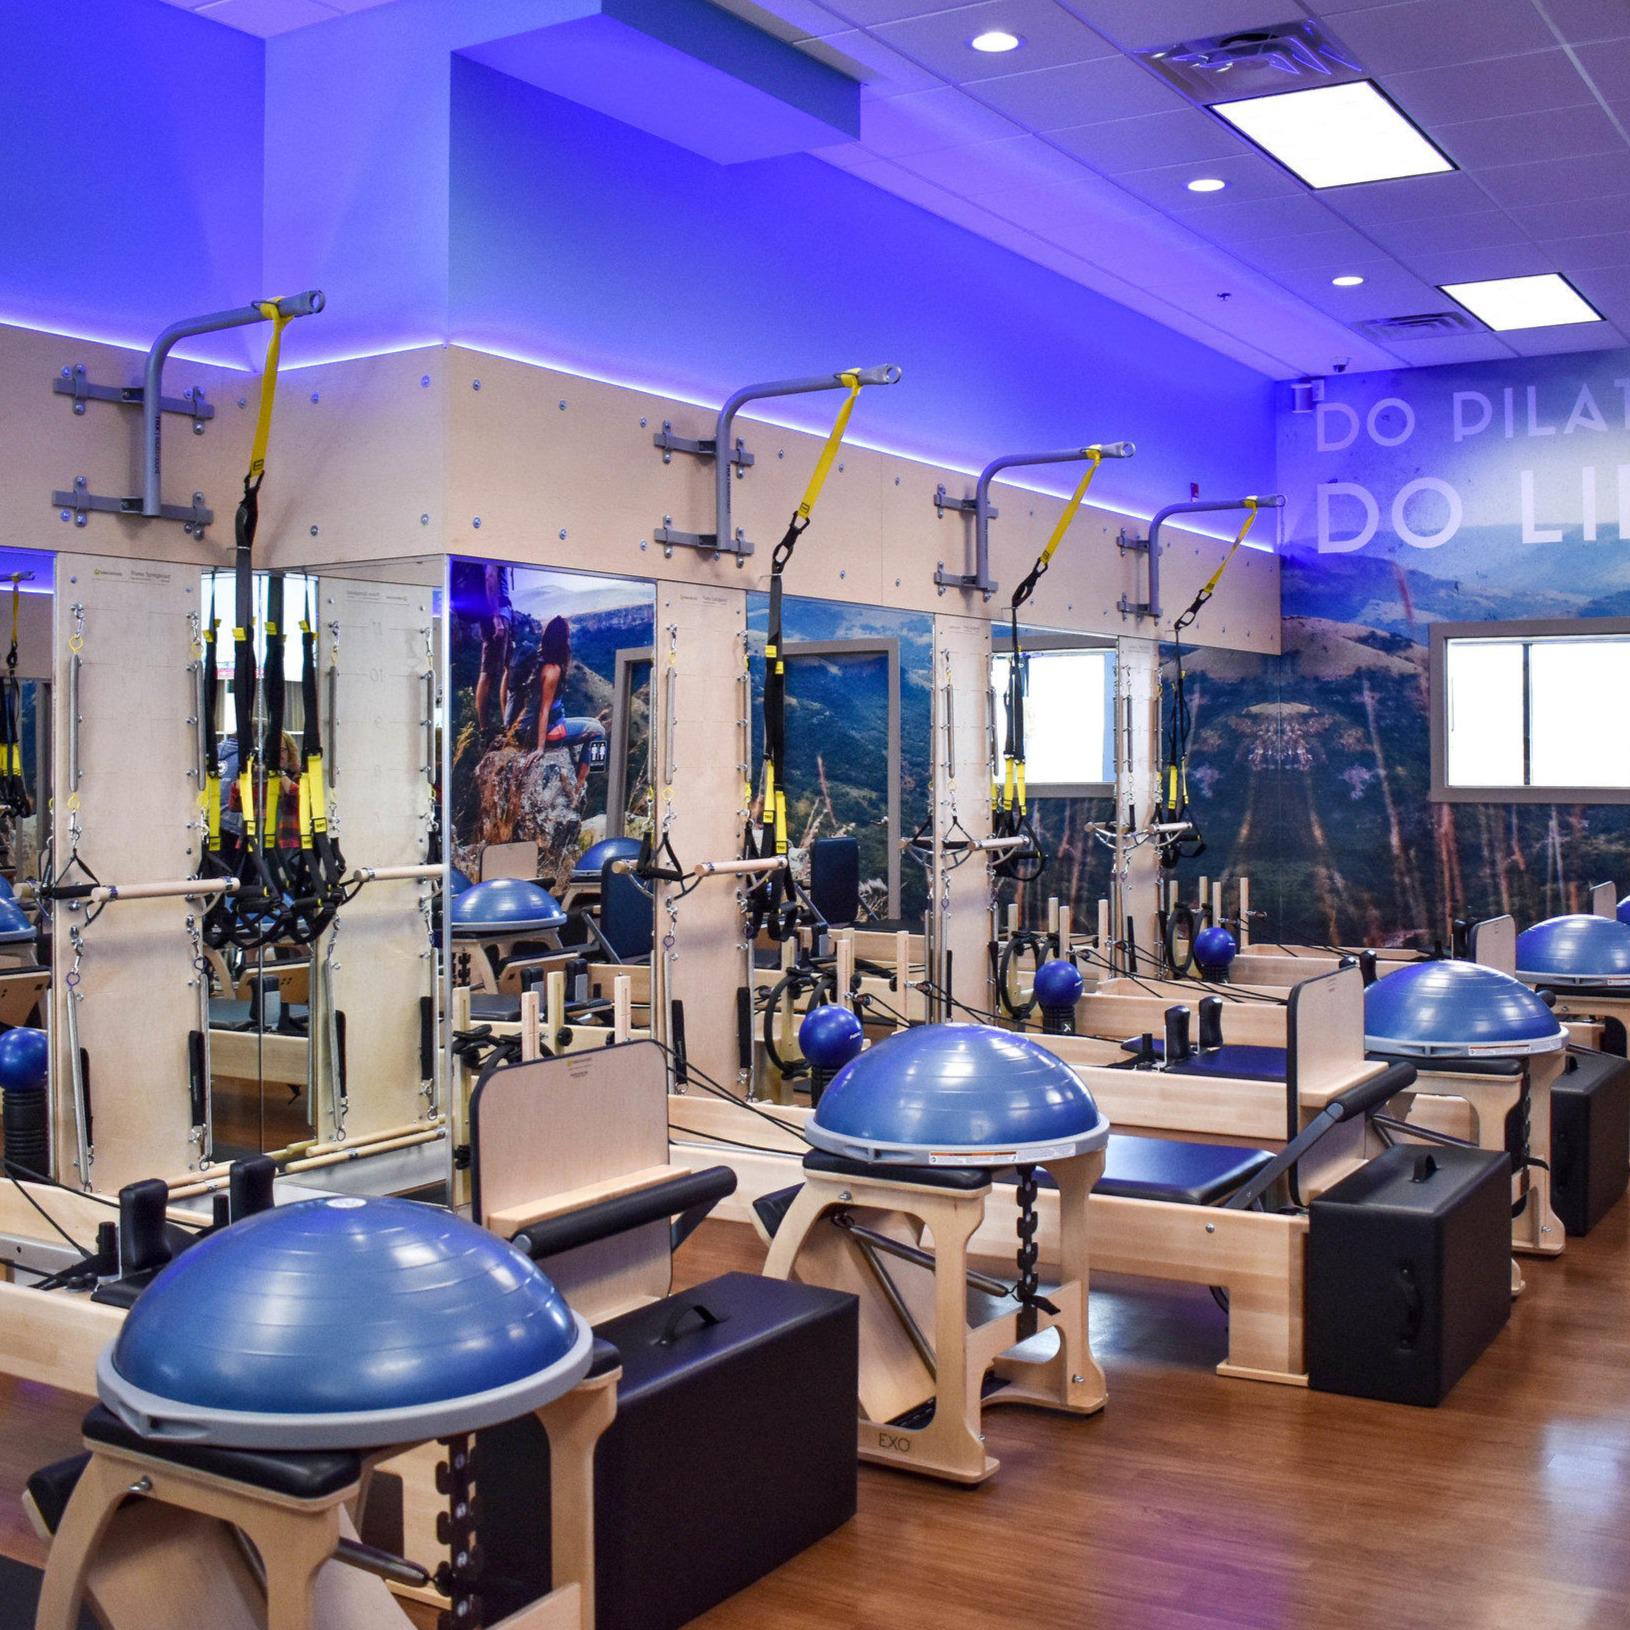 Club Pilates - CP Suspend 1.5 TRX is a full-body strength workout